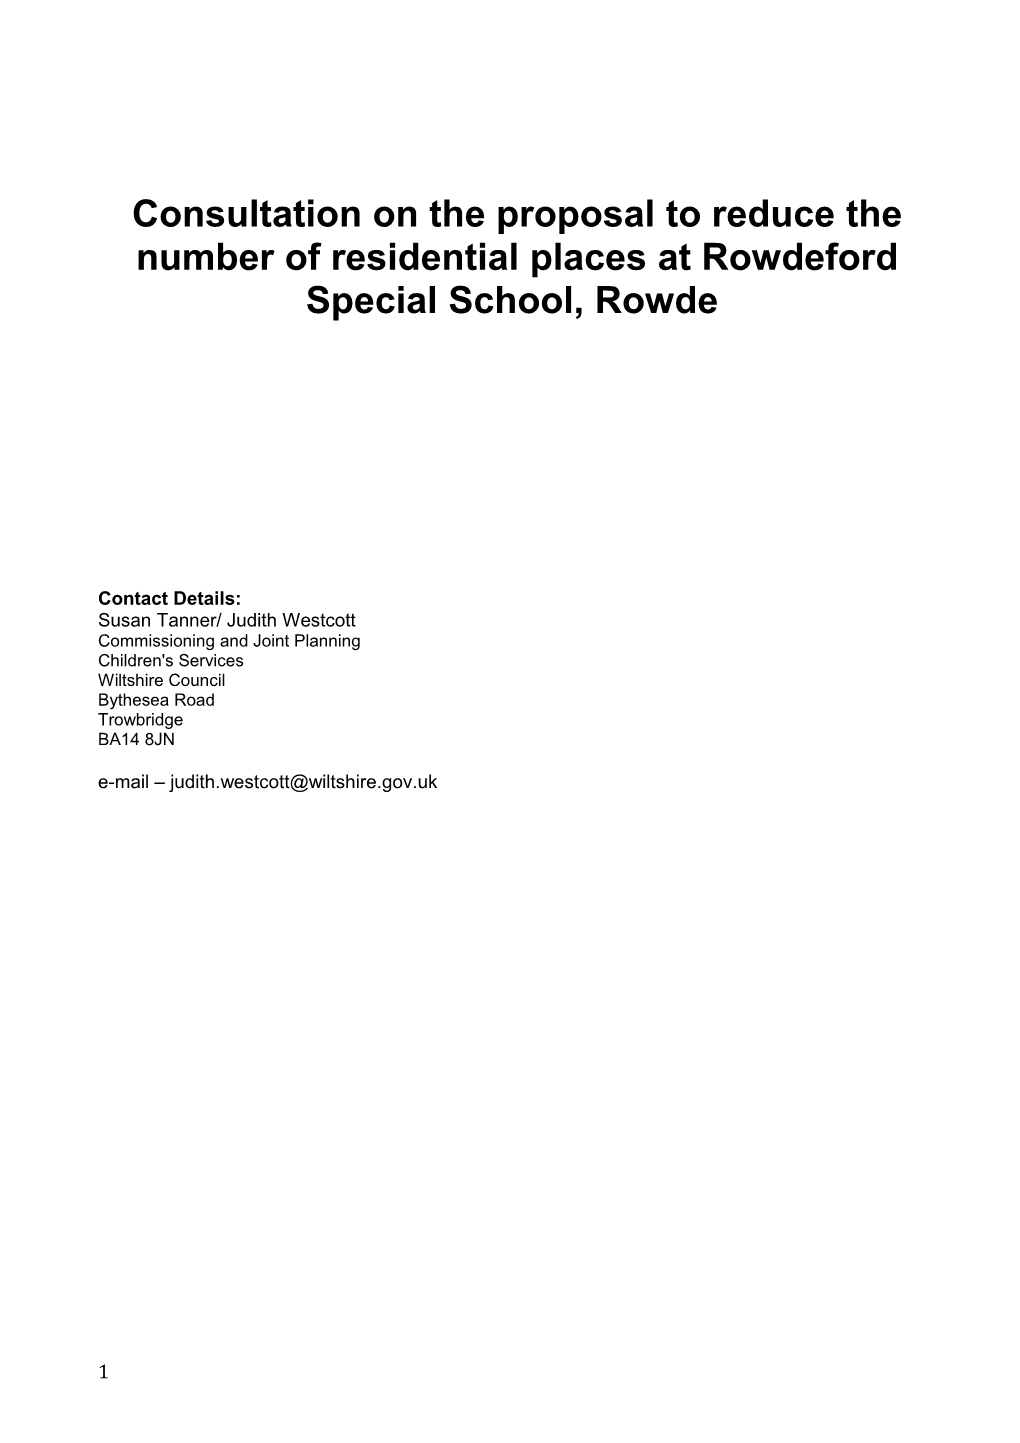 Consultation on the Proposal to Reduce the Number of Residential Places Atrowdeford Special